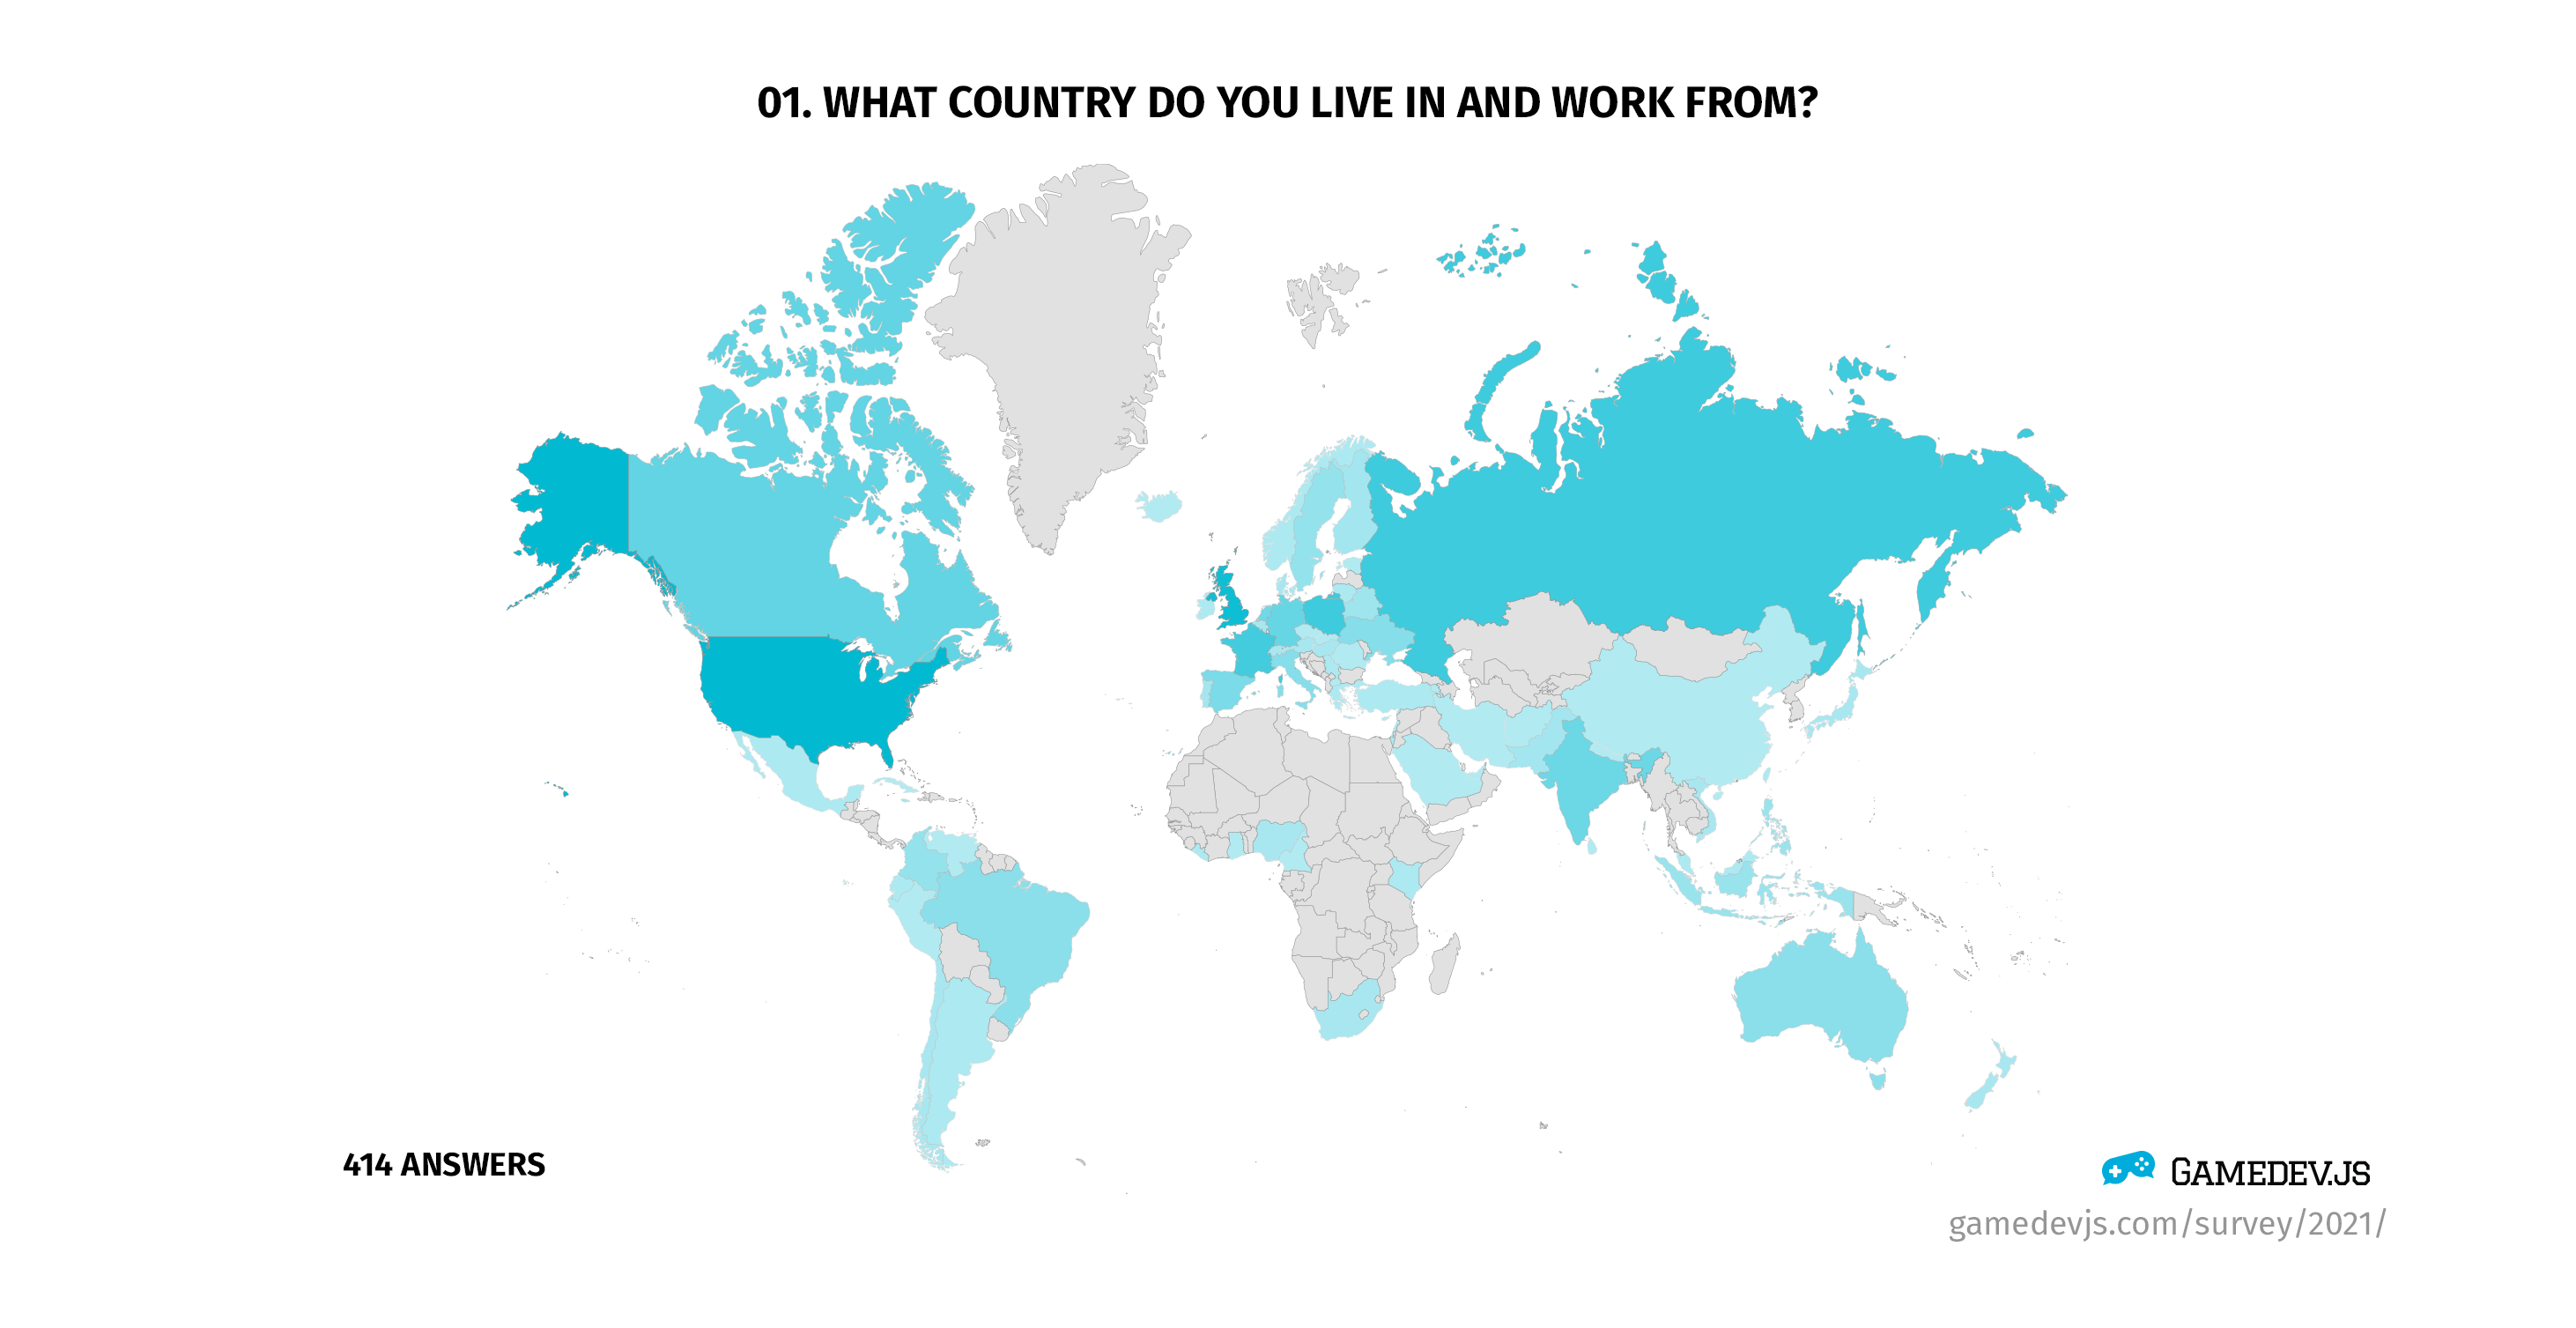 Gamedev.js Survey 2021 - Question #1: What country do you live in and work from?